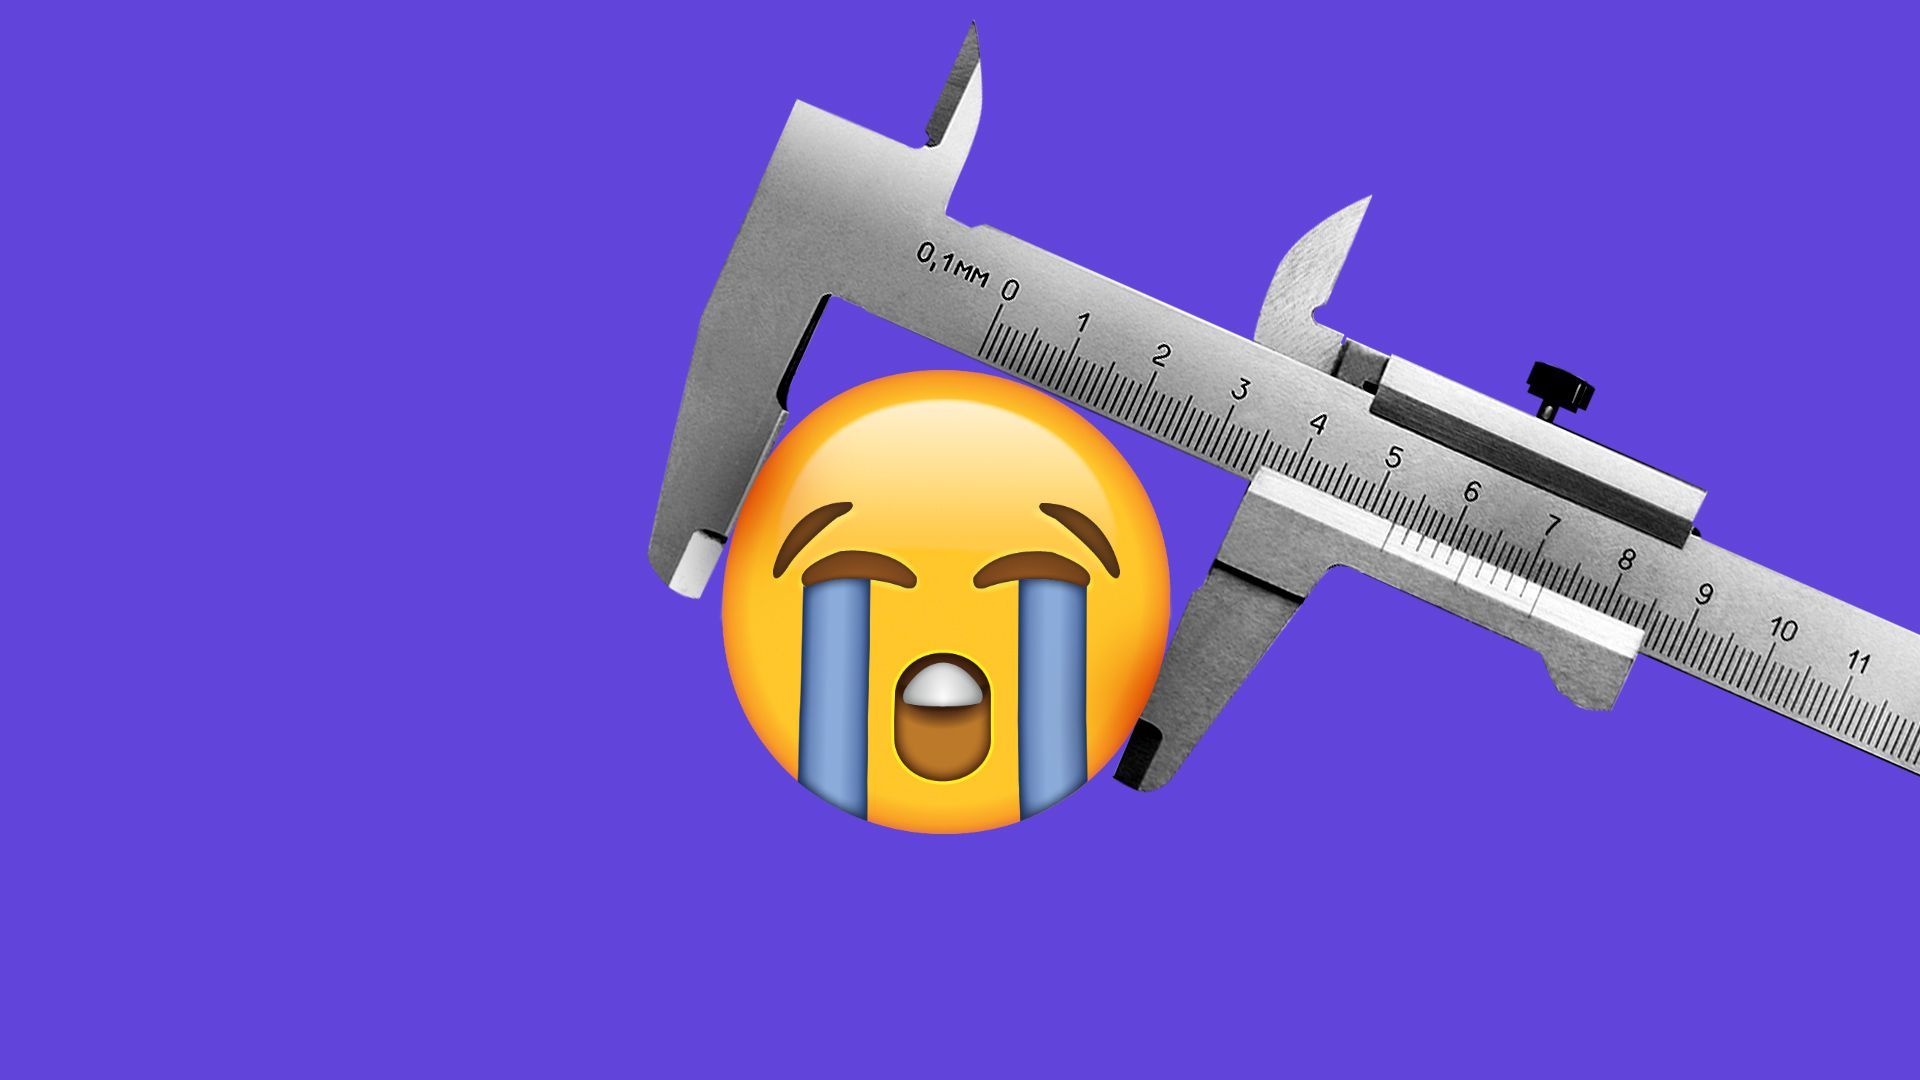 Illustration of the crying face emoji being squeezed in a caliper vice.